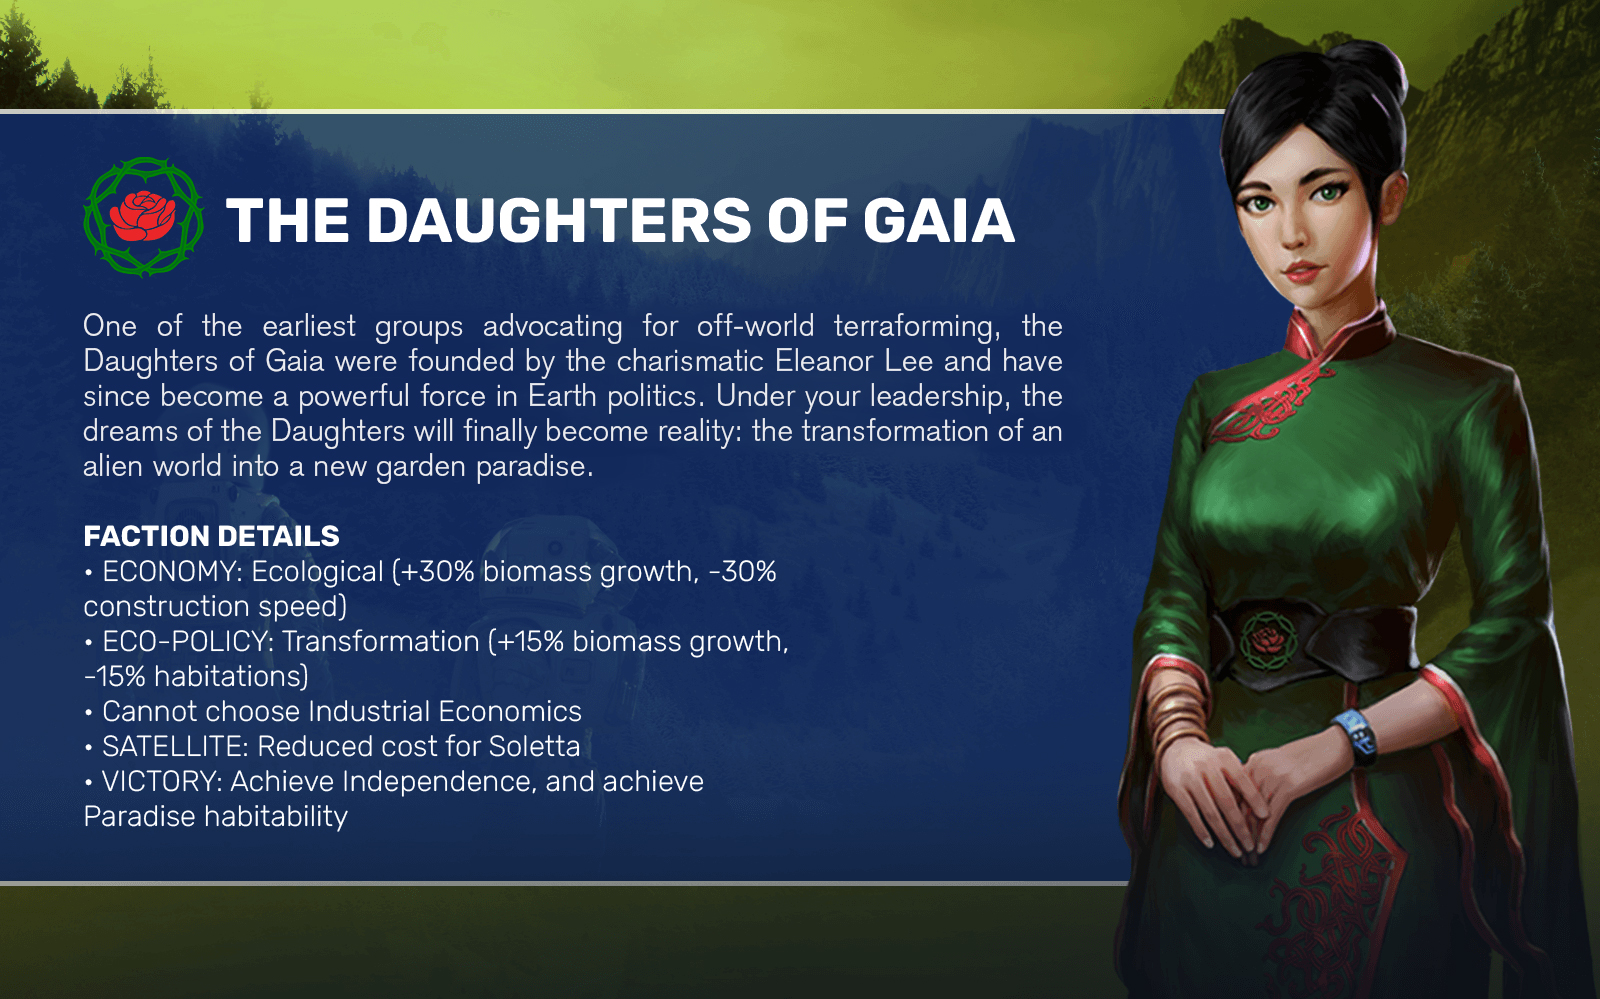 THE DAUGHTERS OF GAIA